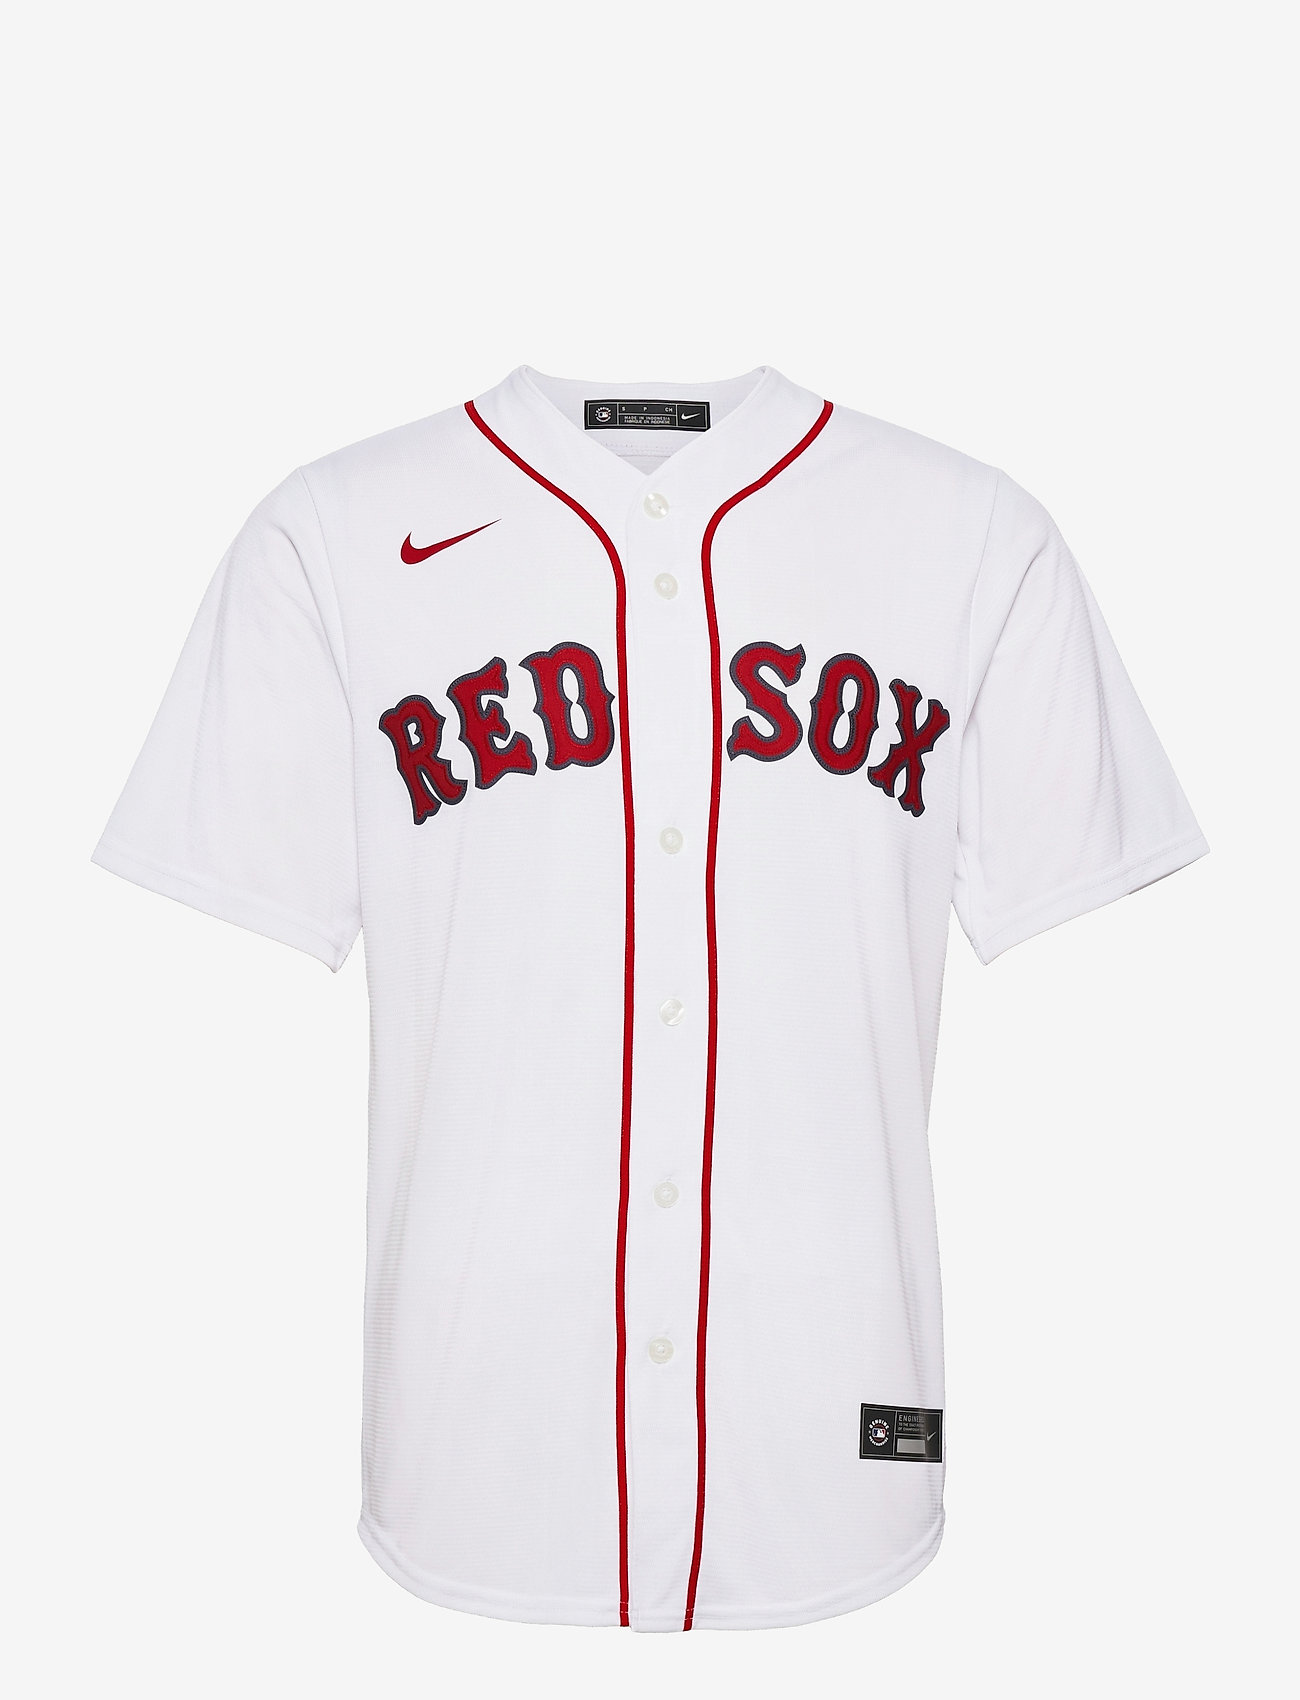 boston red sox official jersey